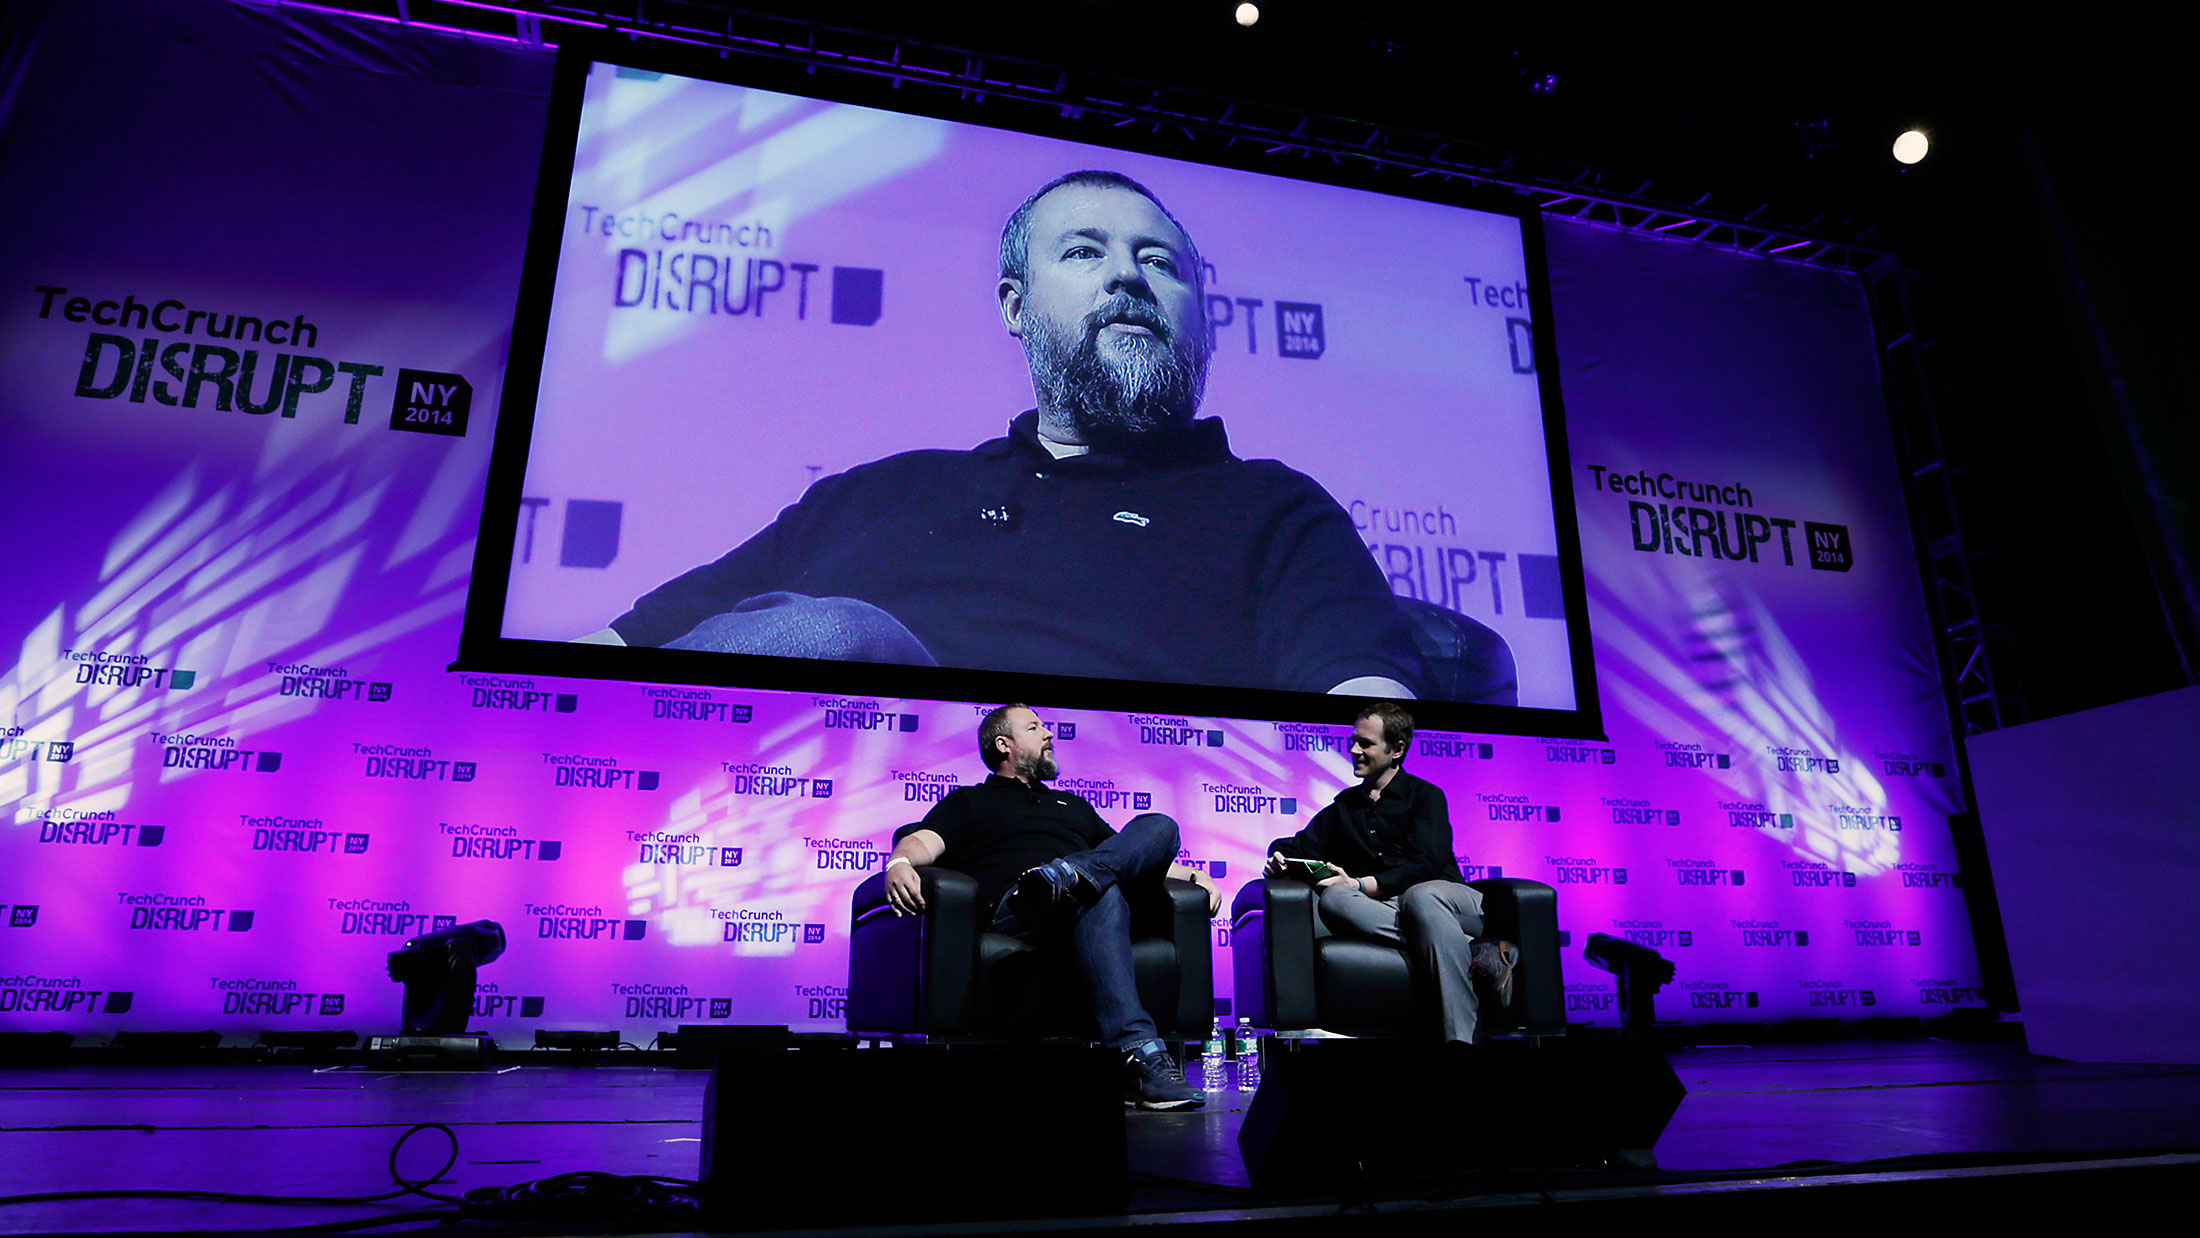 Shane Smith, co-founder and chief executive officer of Vice Media Inc., left, speaks during the TechCrunch Disrupt NYC 2014 conference in New York.
